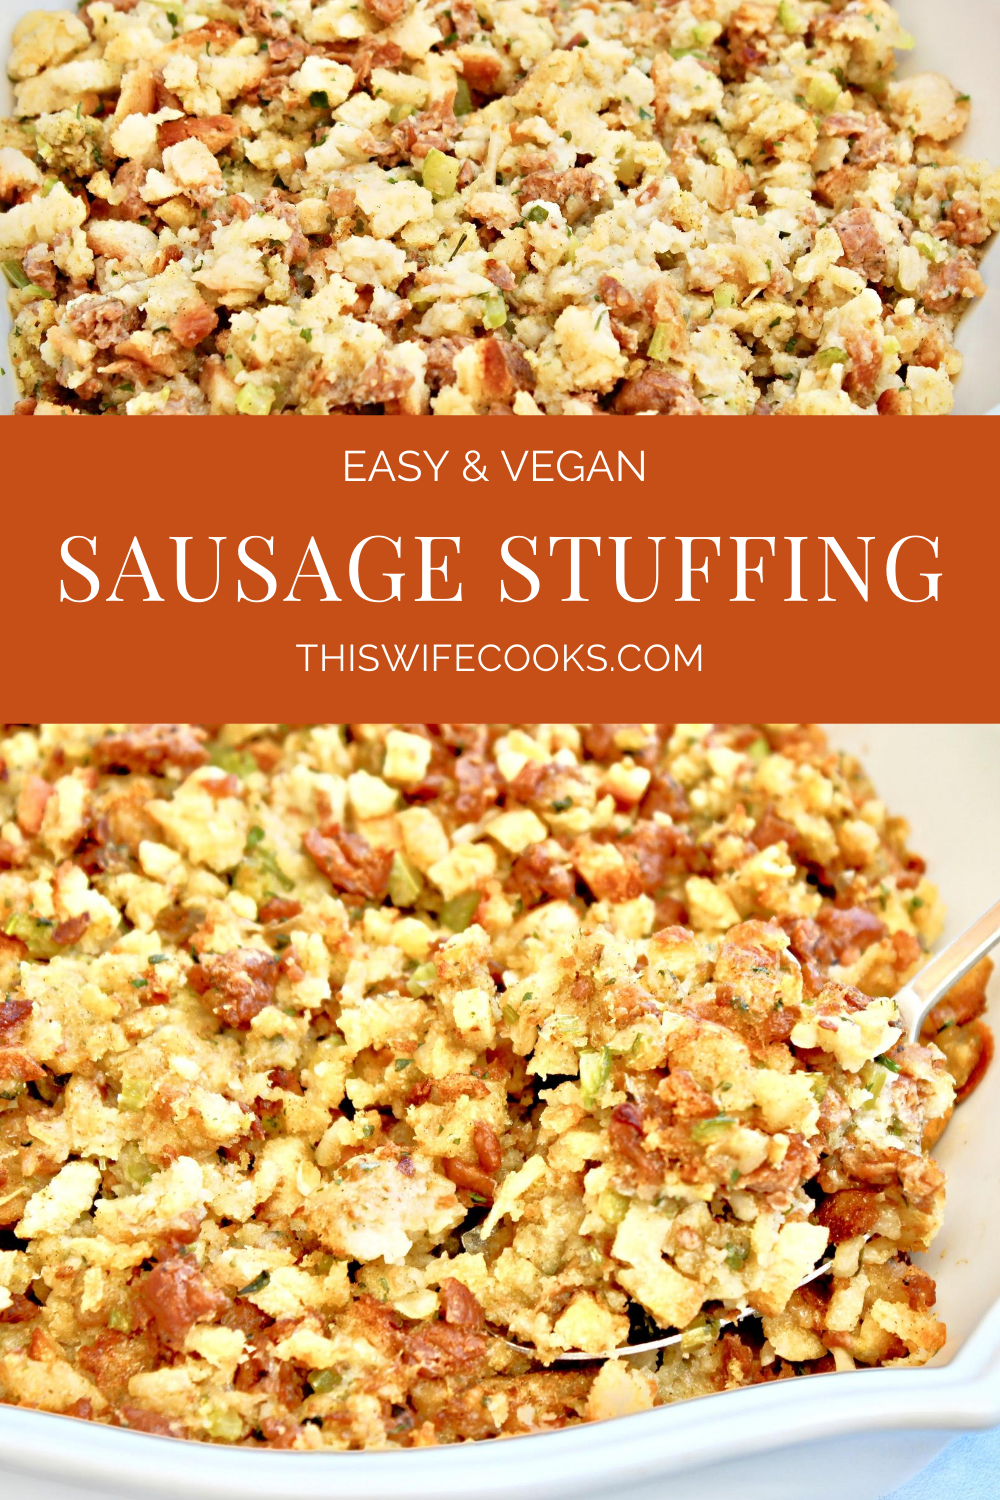 Sausage Stuffing ~ 
Upgrade store-bought stuffing mix with fresh veggies and plant-based sausage.

This savory classic Thanksgiving side dish is ready to serve in about 30 minutes. via @thiswifecooks